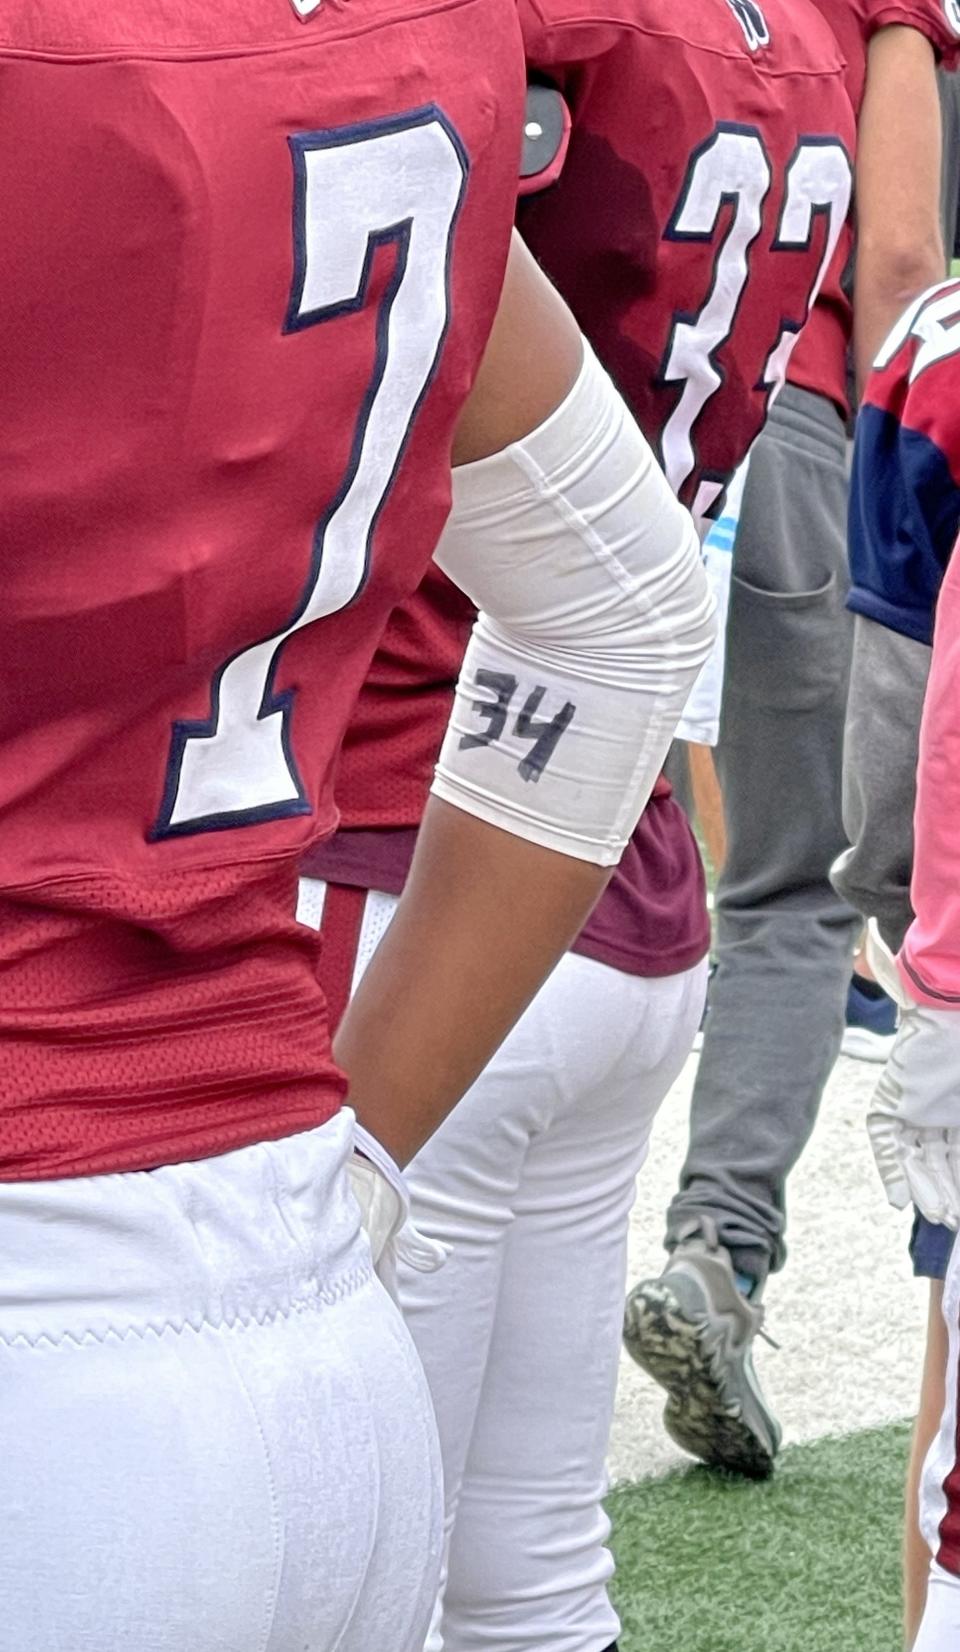 Westborough senior Hemanth Nekkalaudi has teammate Sebastian Grillo's 34 written on one of his arm bands. Grillo is out for the season due to a pre-season foot injury.